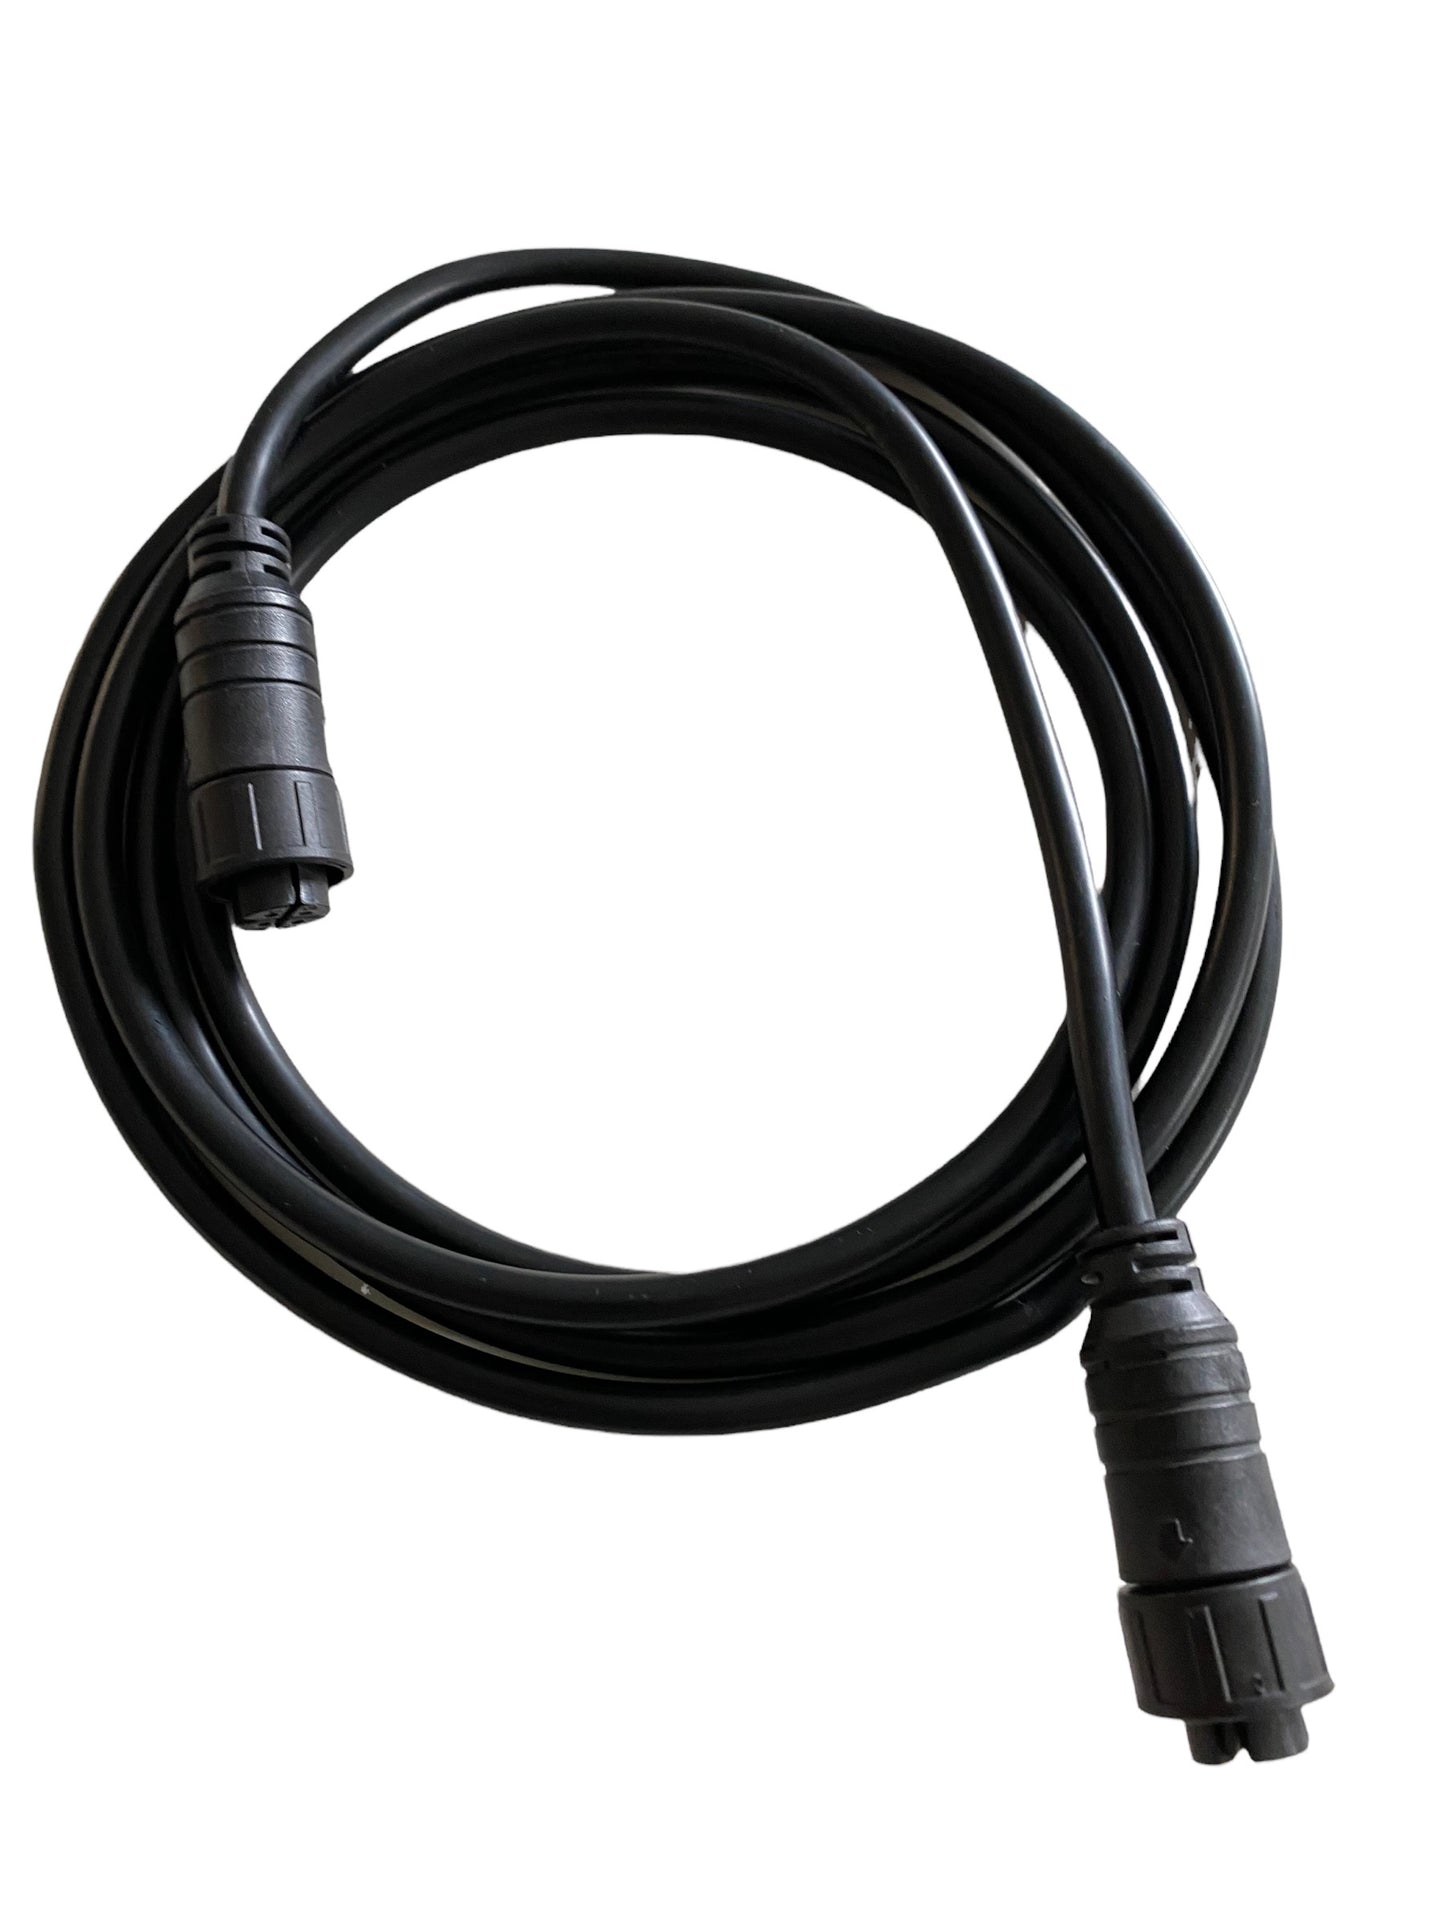 Shadow Caster Shadow-net 4m Cable